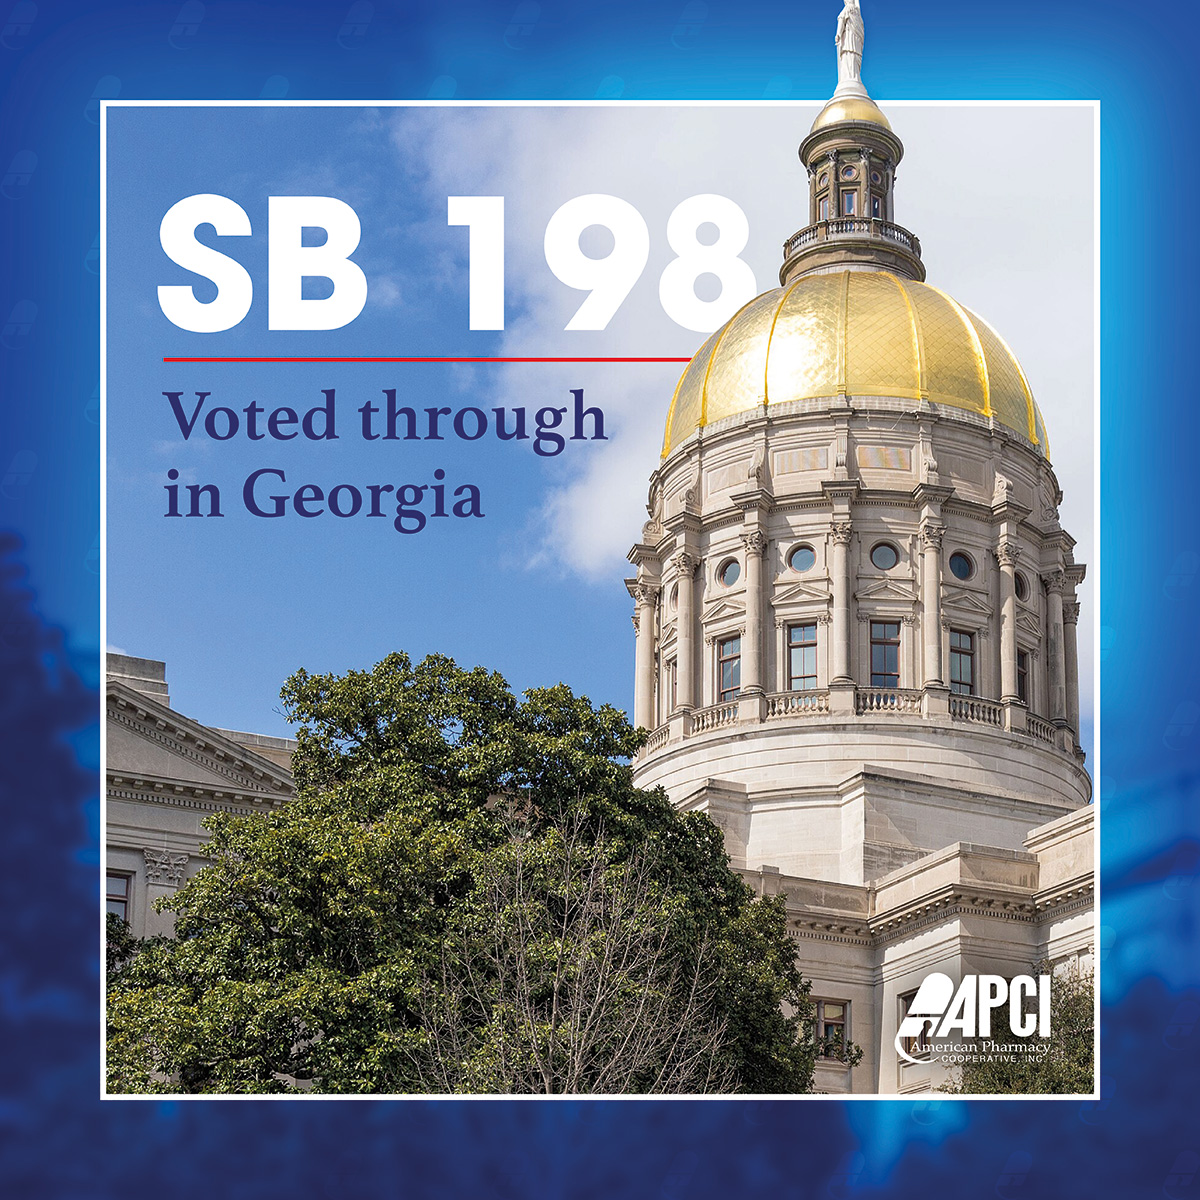 SB 198, which positively affects independent pharmacy reimbursement in Georgia's state health plan, passed the state Senate late last night and is headed to the Governor's desk! APCI is proud to have worked with @GeorgiaPharmacy on this important bill!